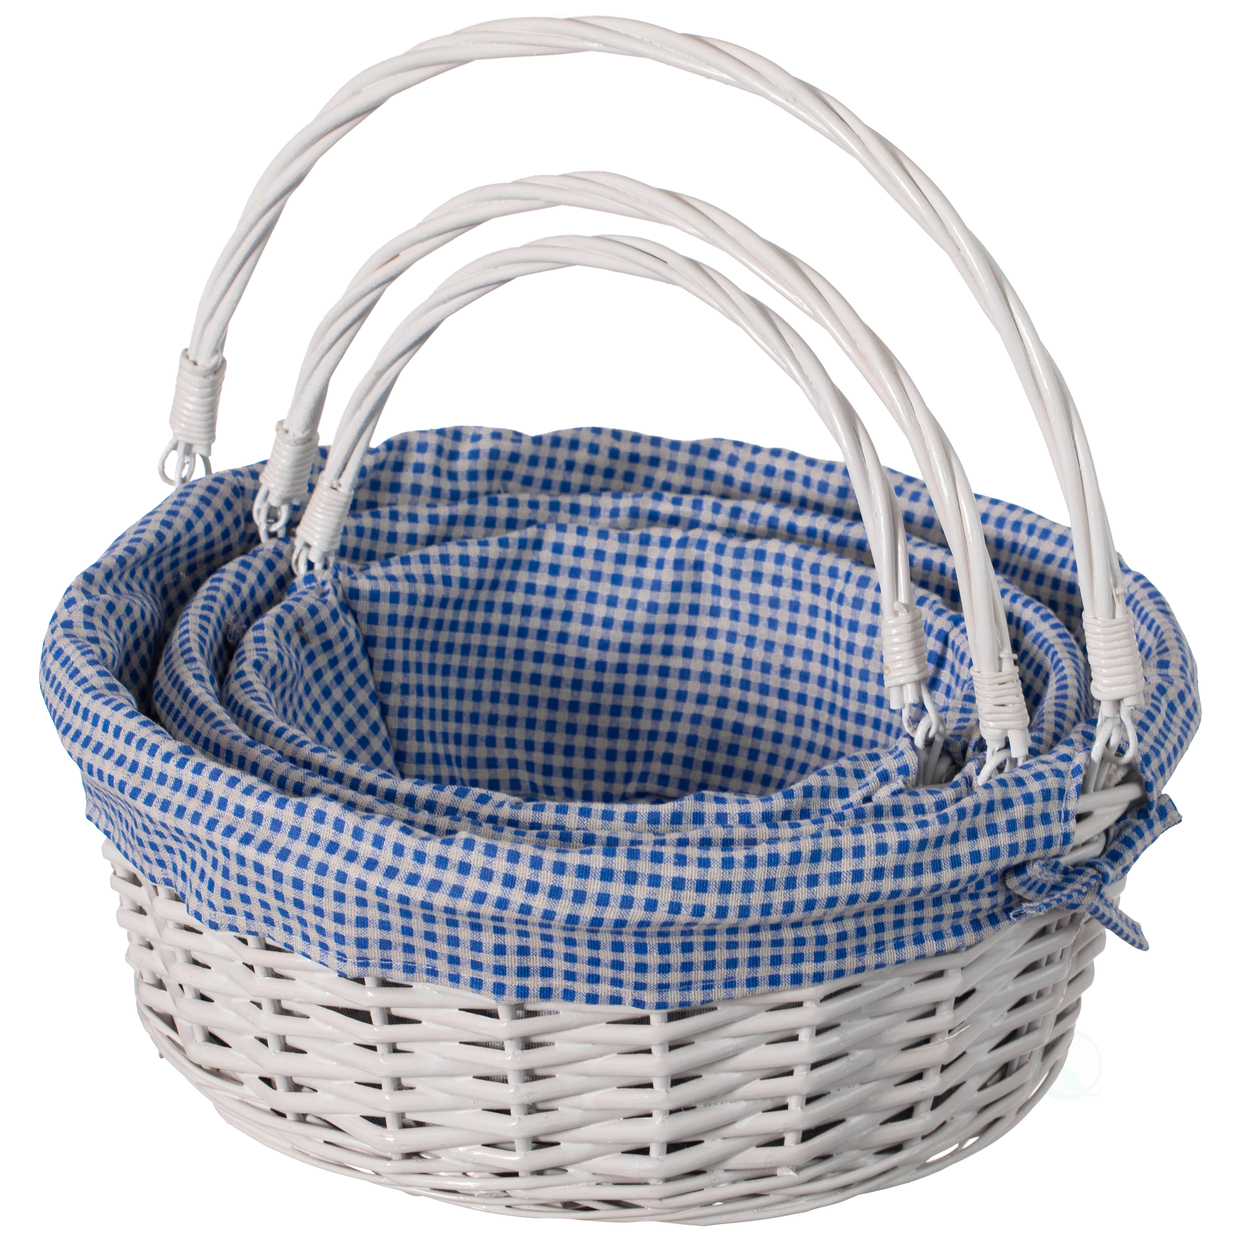 Traditional White Round Willow Gift Basket With Gingham Liner And Sturdy Foldable Handles, Food Snacks Storage Basket - Blue, Small